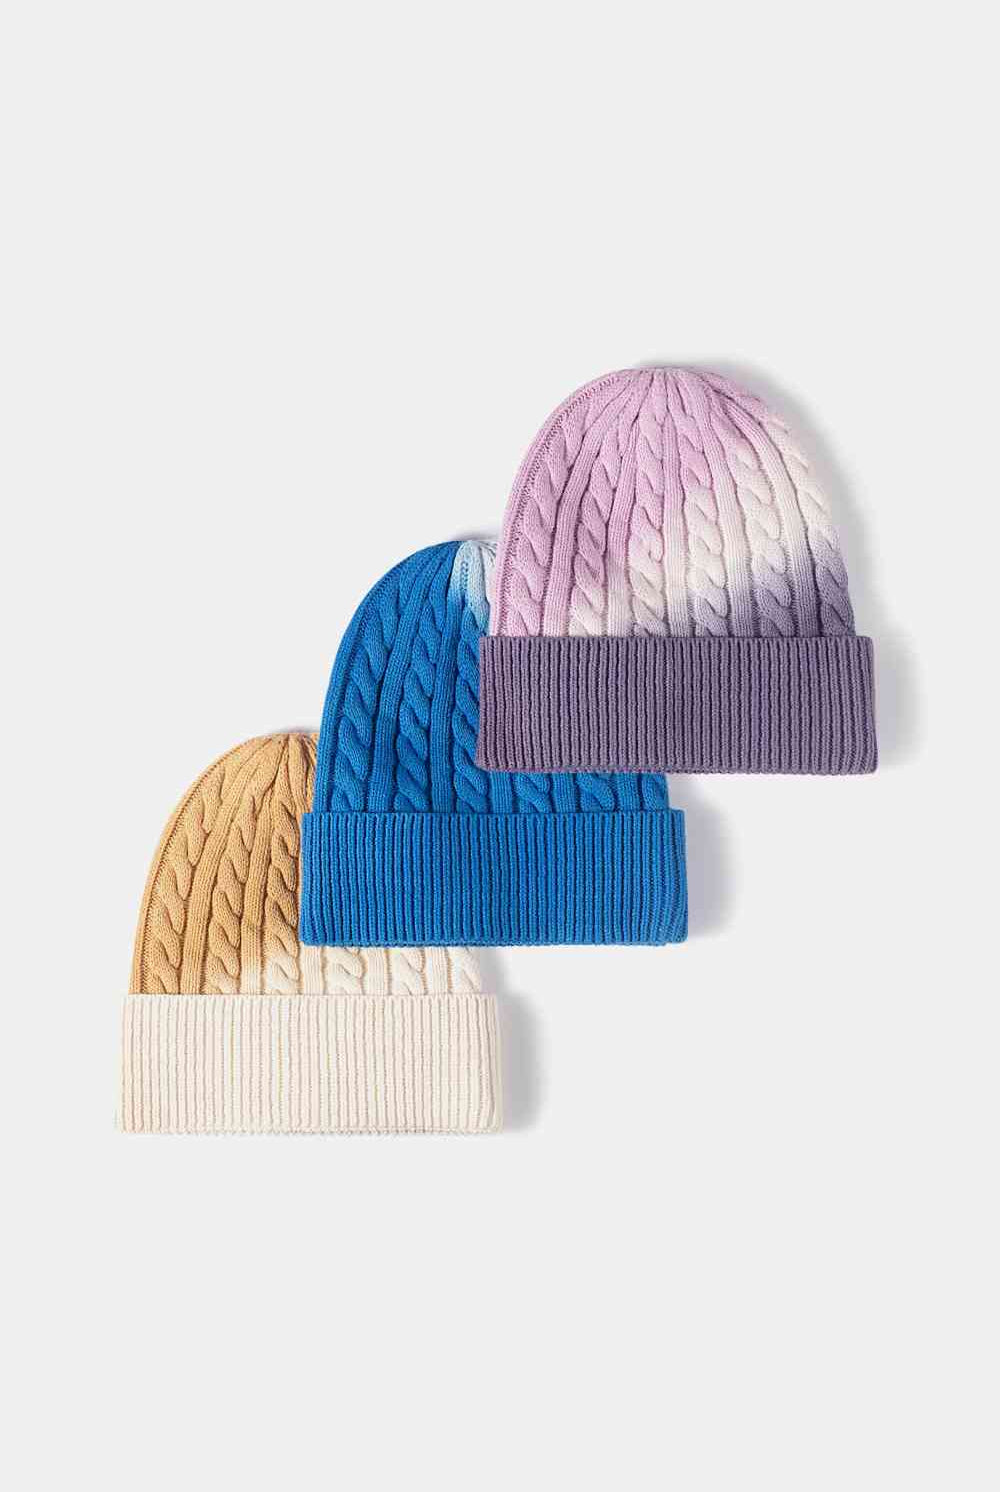 Lavender Contrast Tie-Dye Cable-Knit Cuffed Beanie Winter Accessories